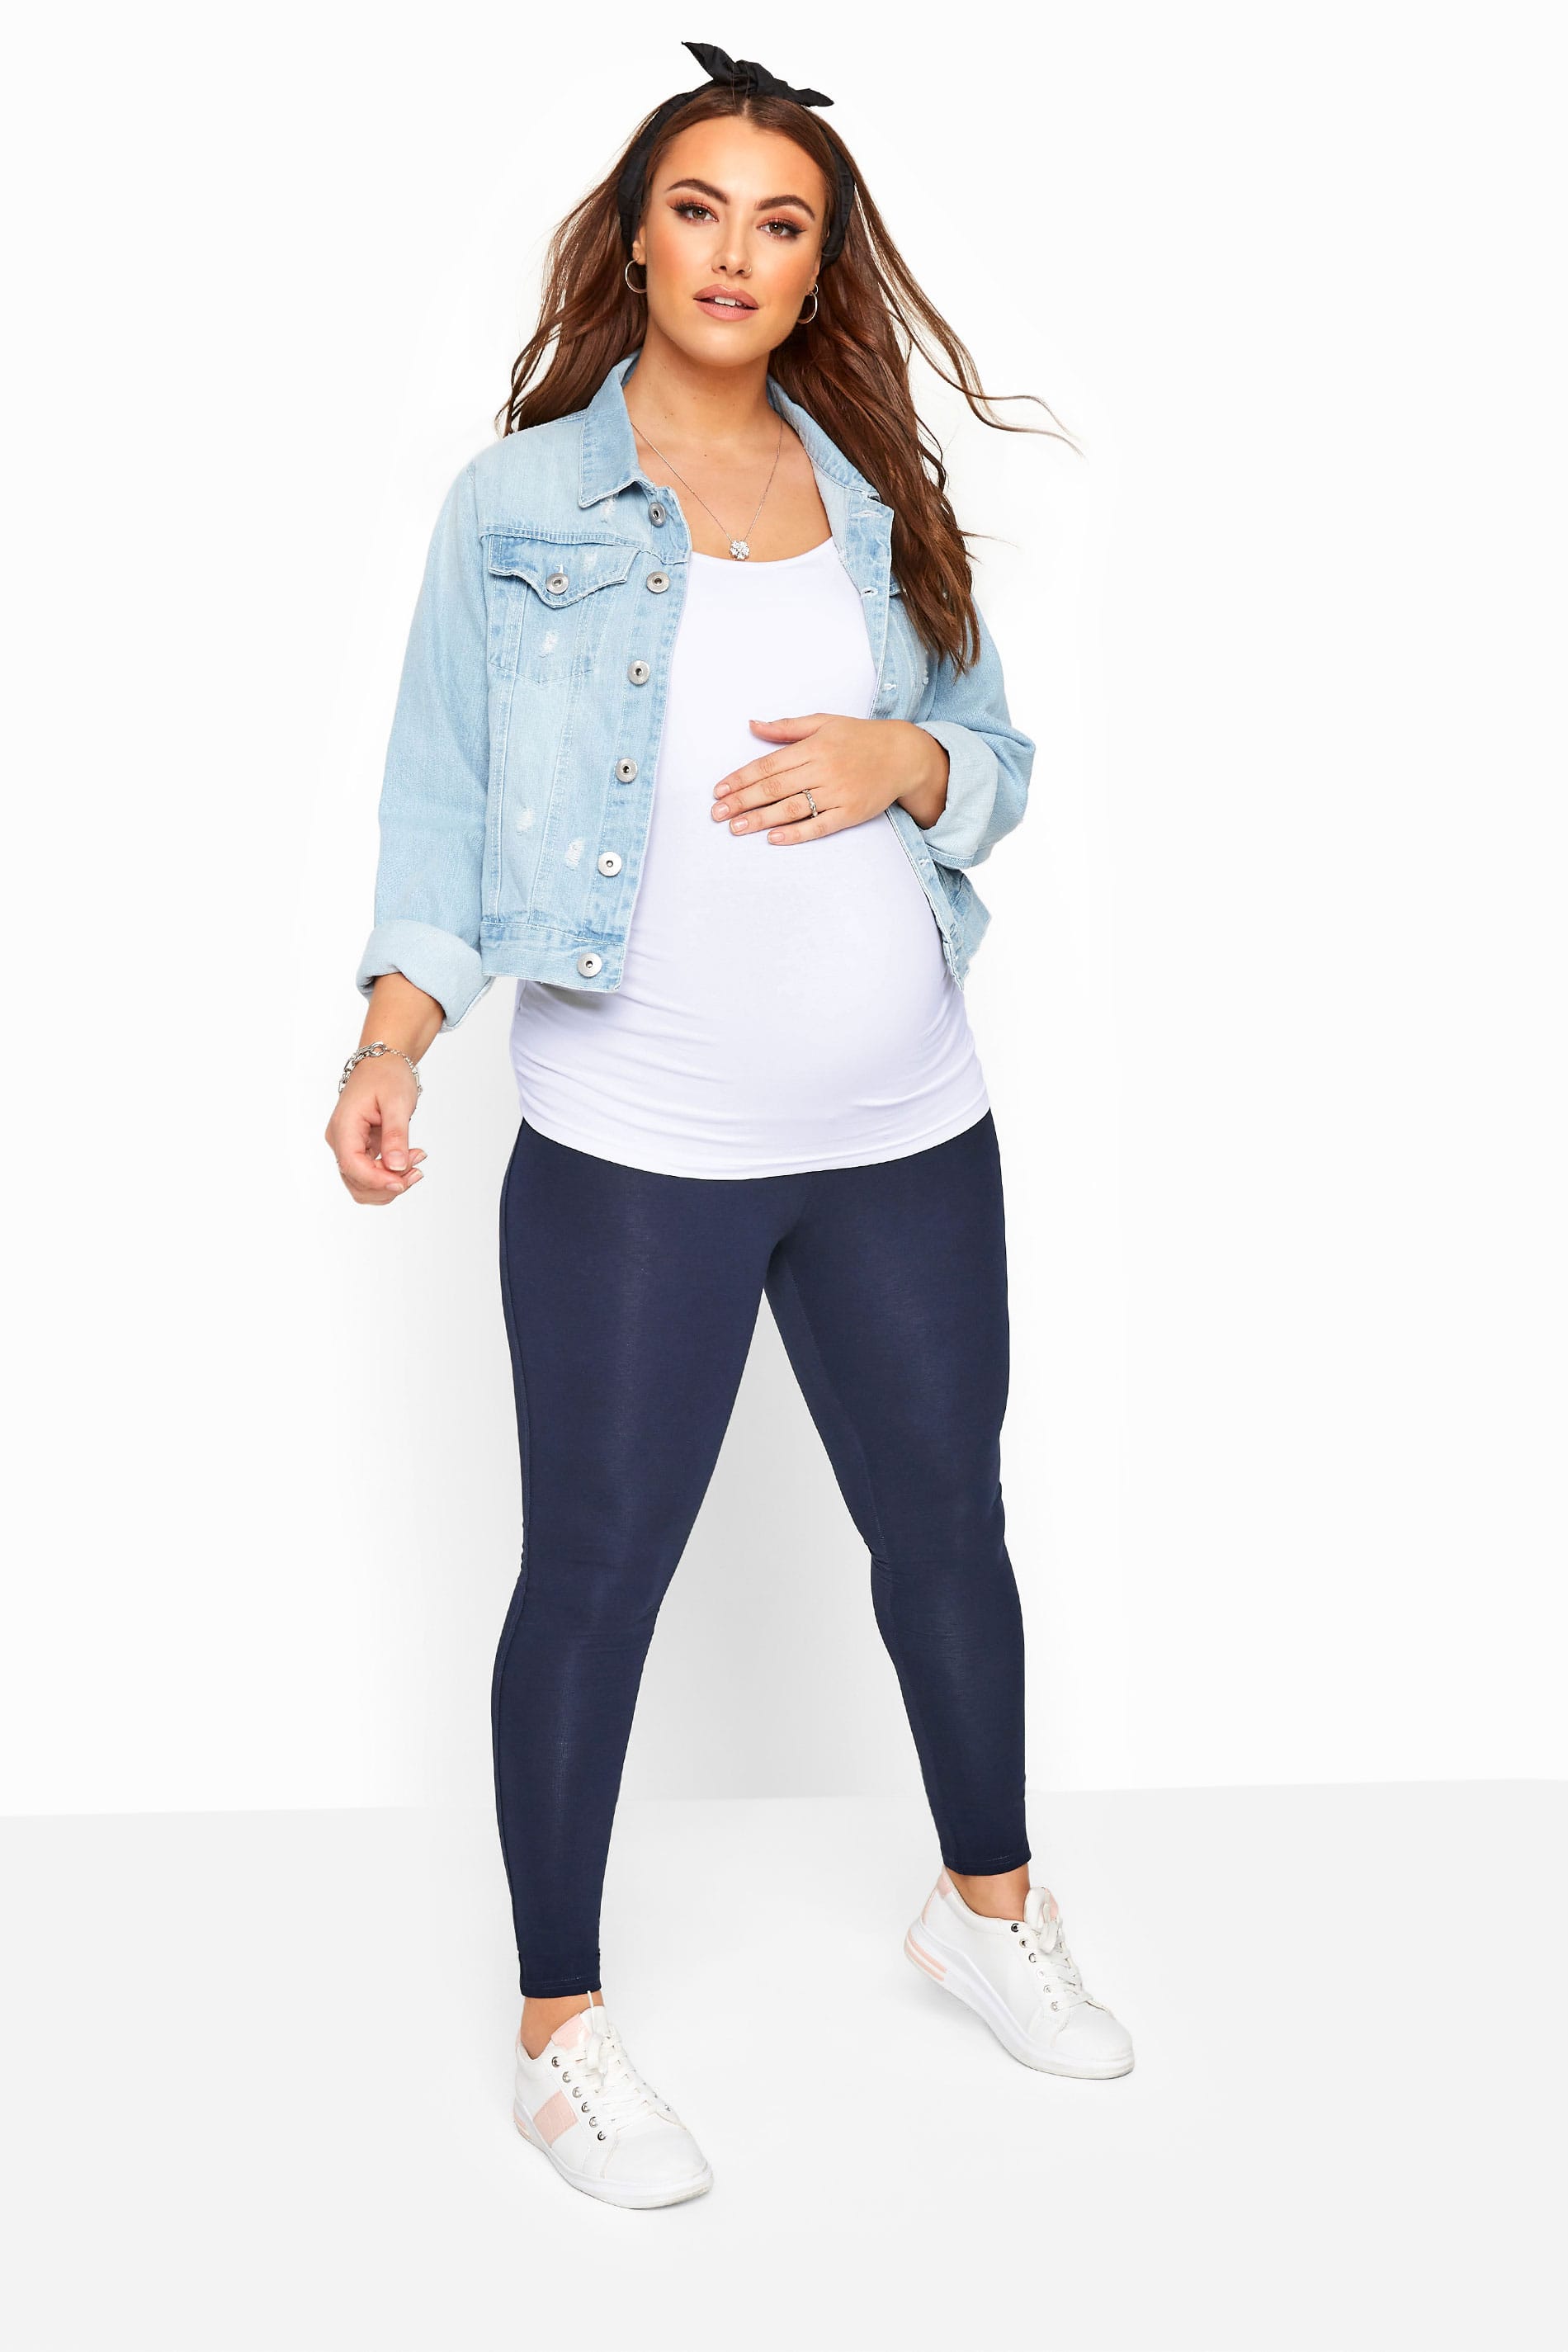 BUMP IT UP MATERNITY Navy Blue Cotton Essential Leggings With Comfort Panel Plus Size 16 to 32 2